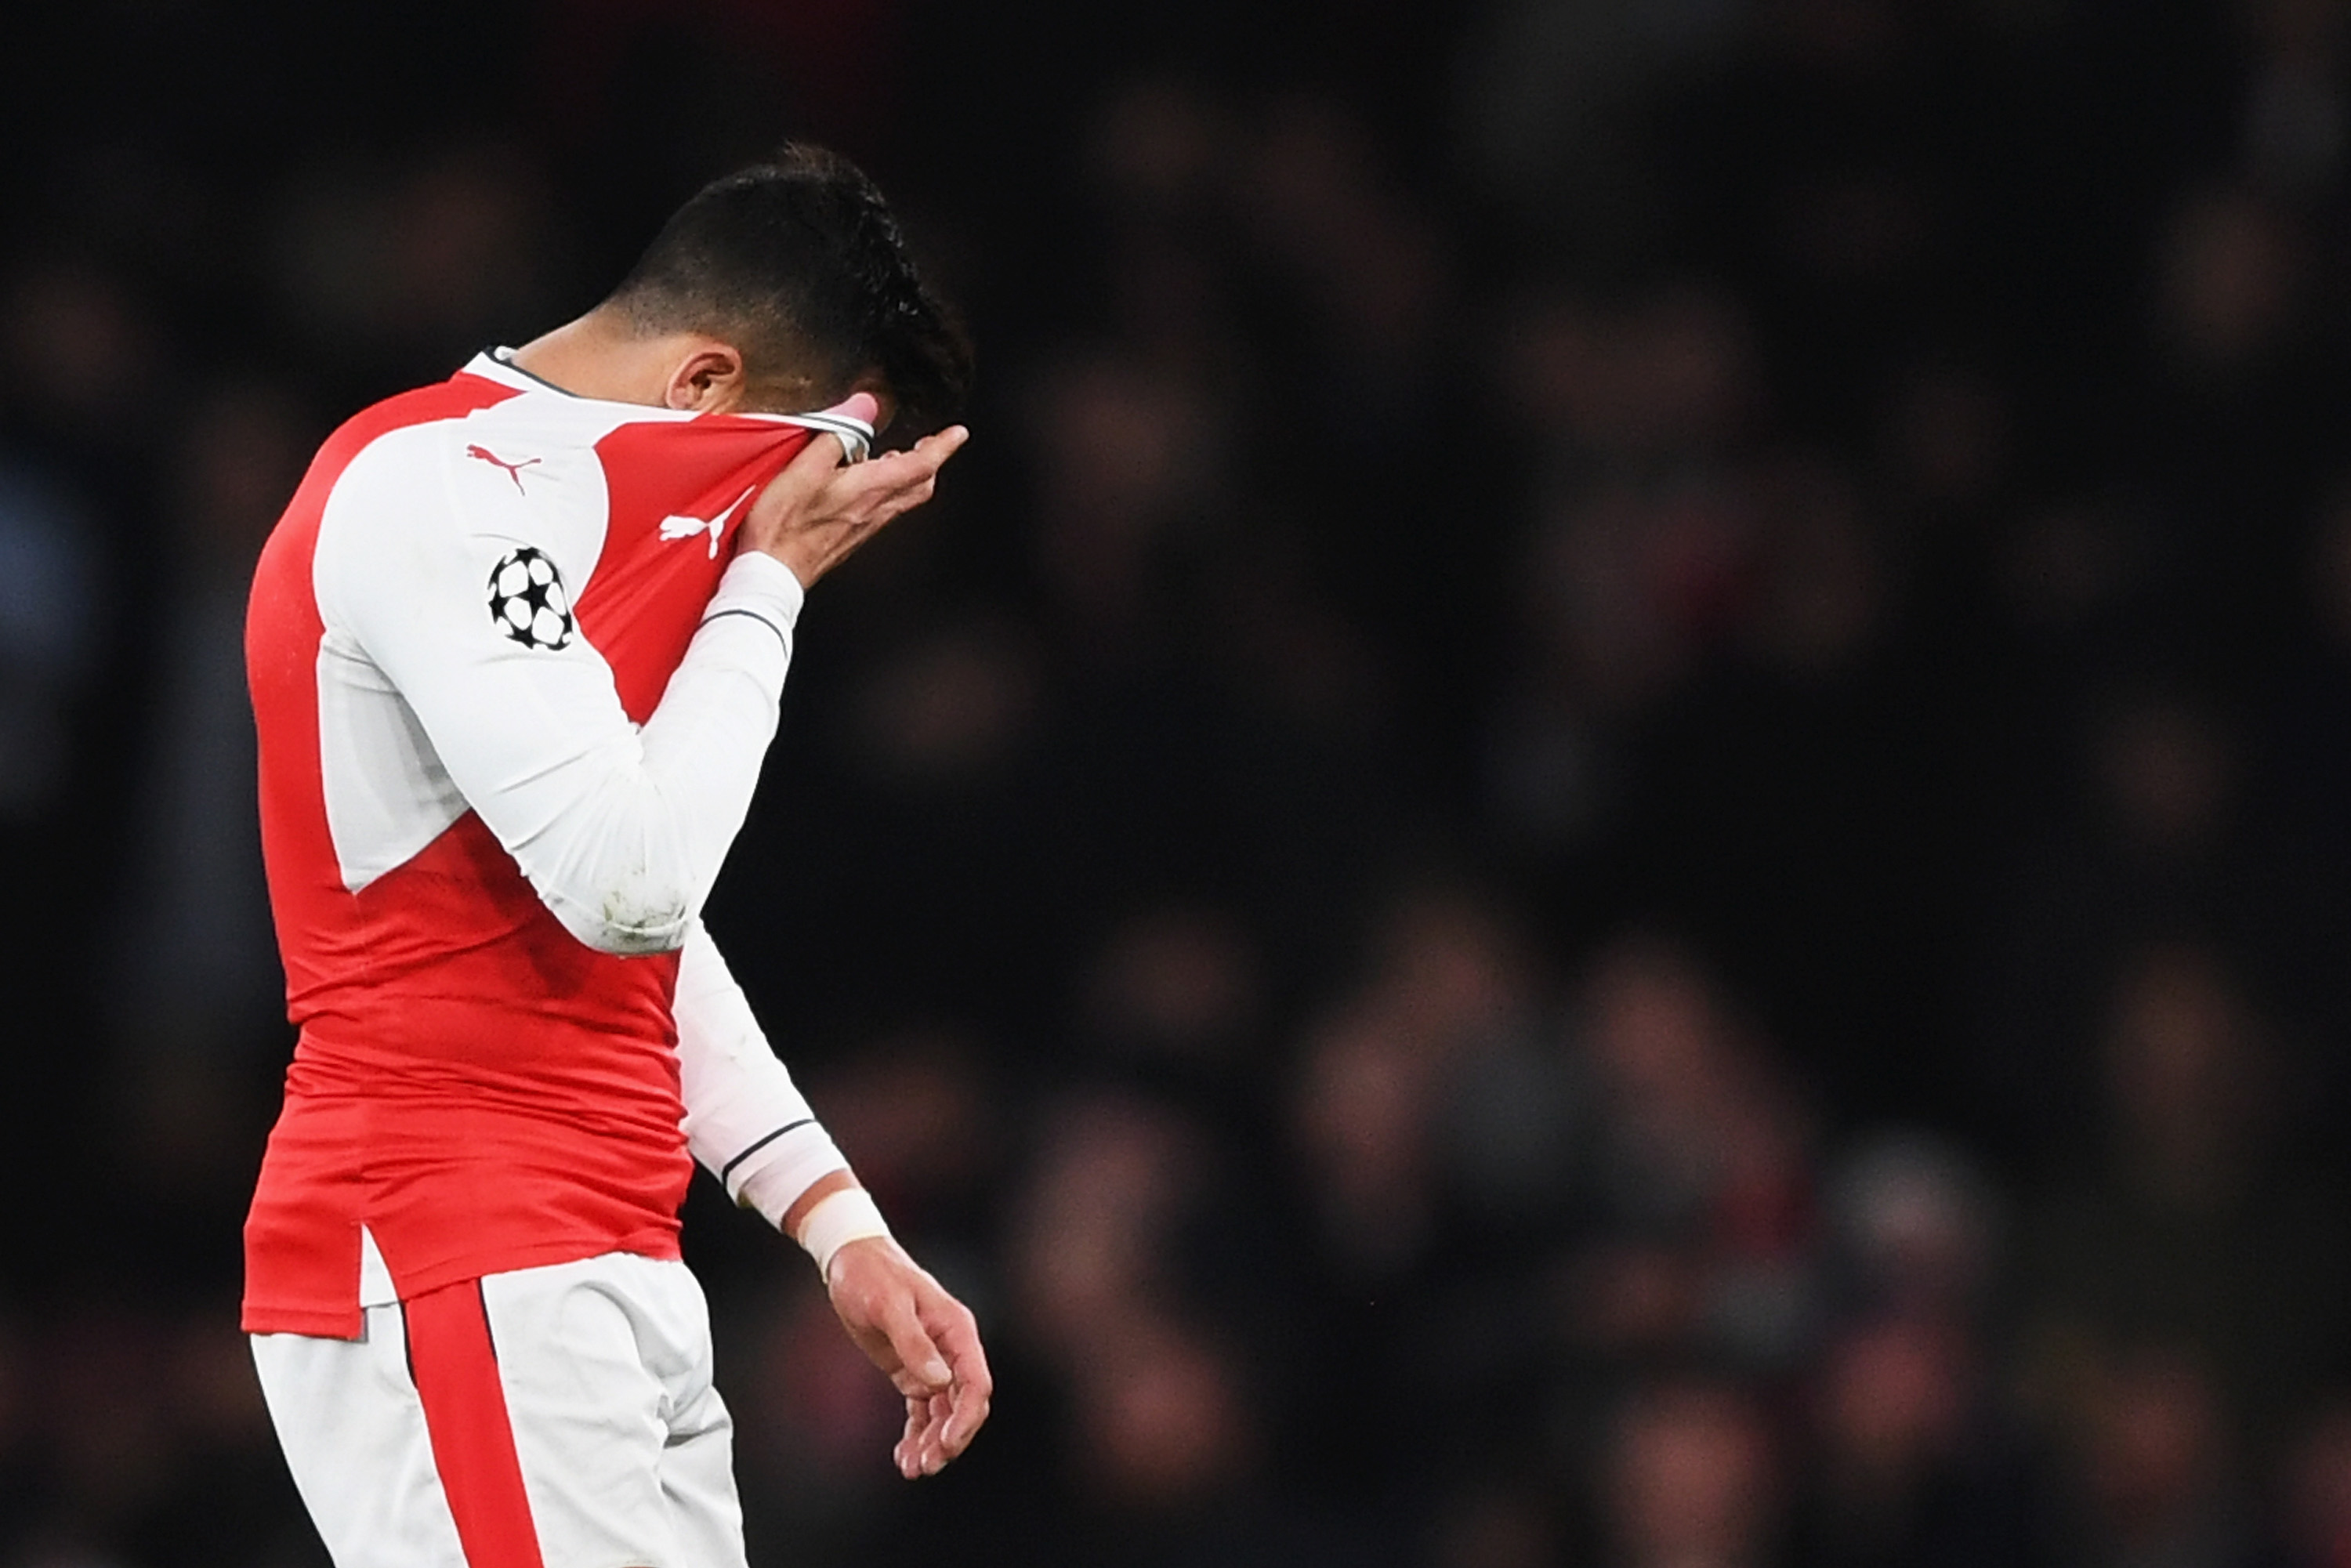 LONDON, ENGLAND - MARCH 07:  Alexis Sanchez of Arsenal reacts at half time during the UEFA Champions League Round of 16 second leg match between Arsenal FC and FC Bayern Muenchen at Emirates Stadium on March 7, 2017 in London, United Kingdom.  (Photo by Shaun Botterill/Getty Images)